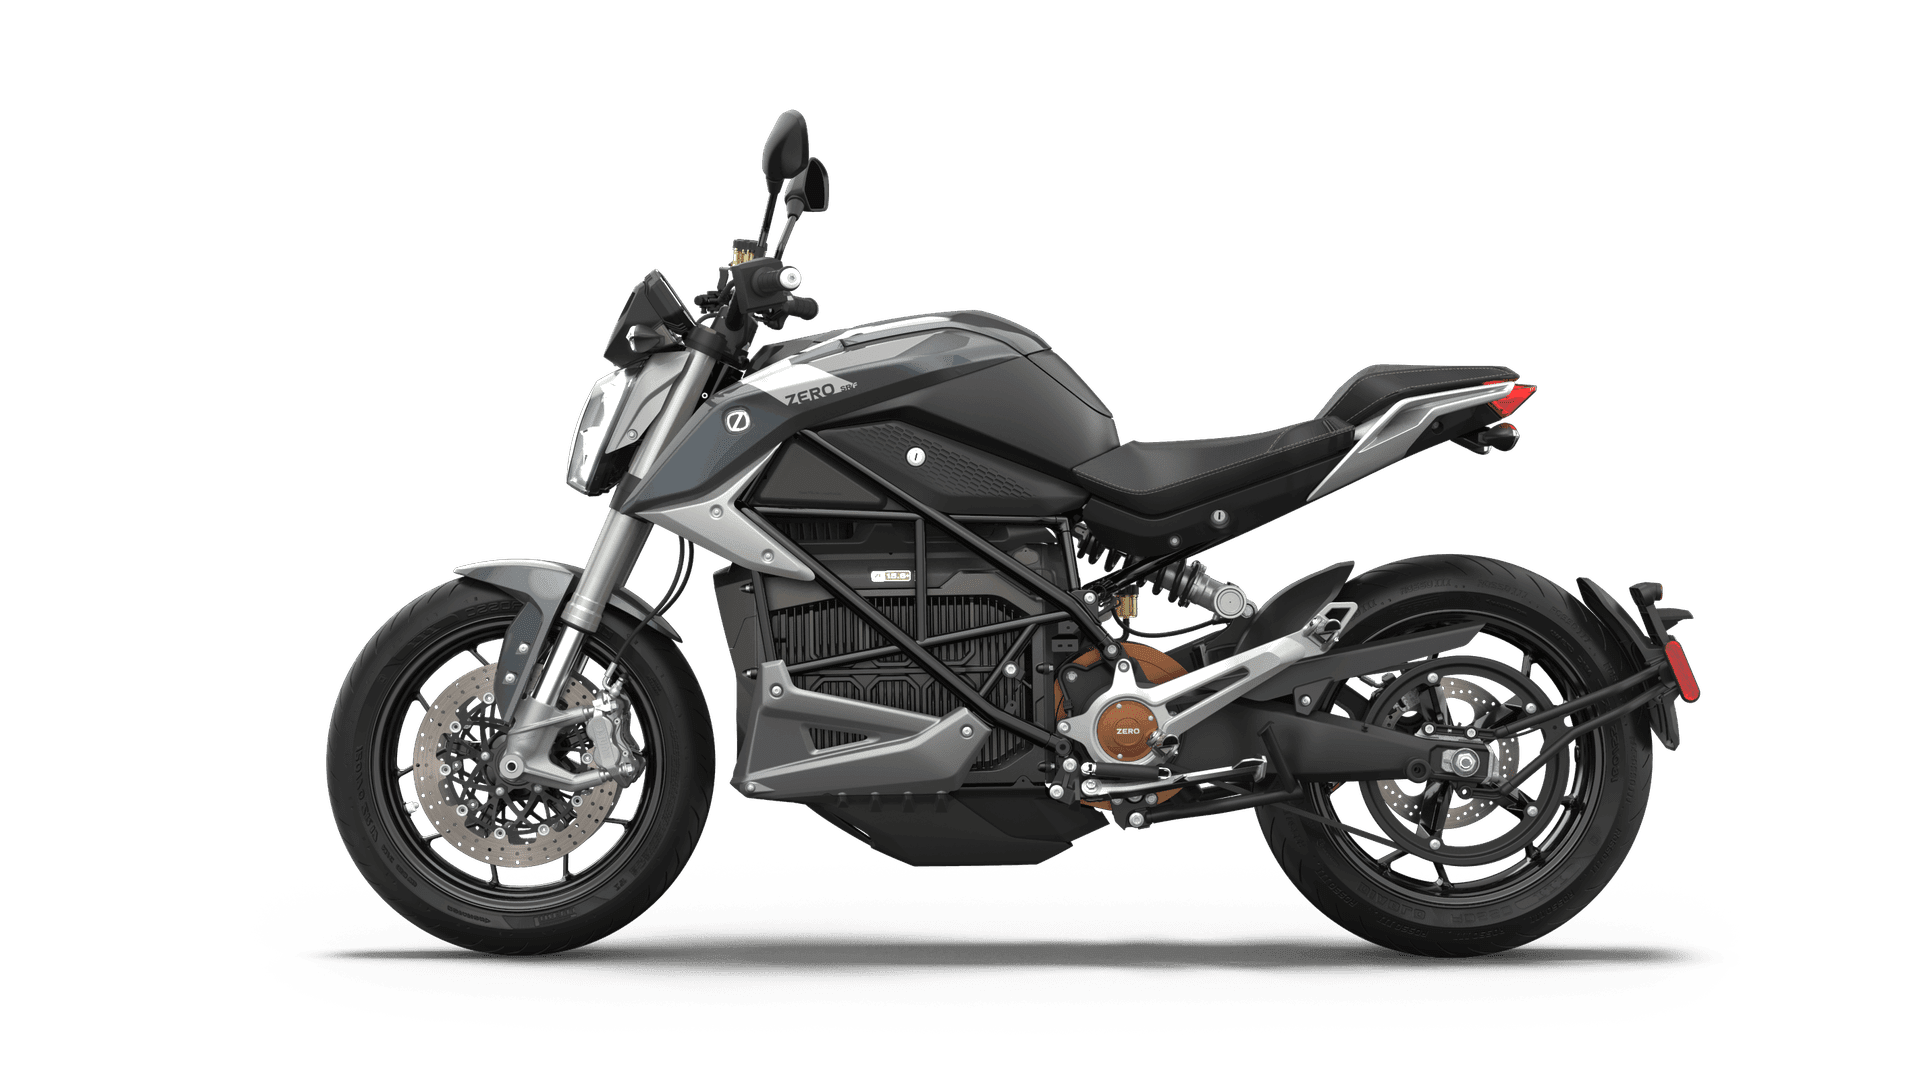 In-App upgrades to be available in 2022 for the Zero motorcycle range